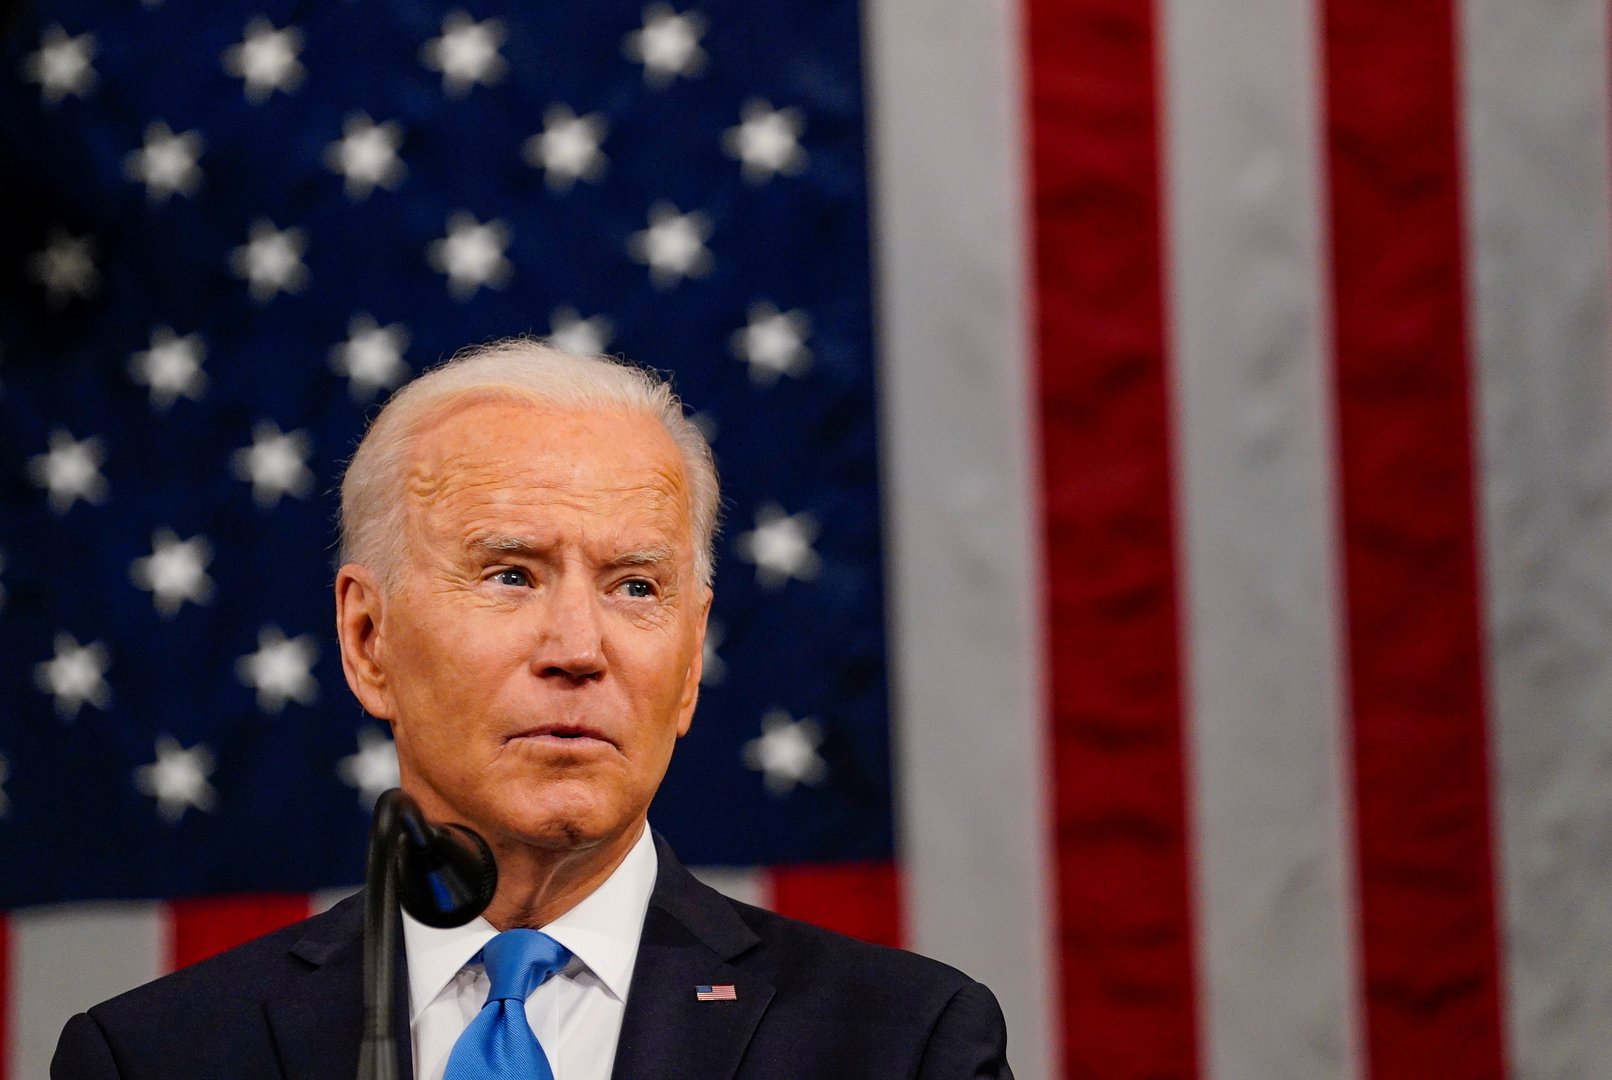 image Putin suspends nuclear pact, Biden says support for Ukraine &#8216;will not waver&#8217; (Update)